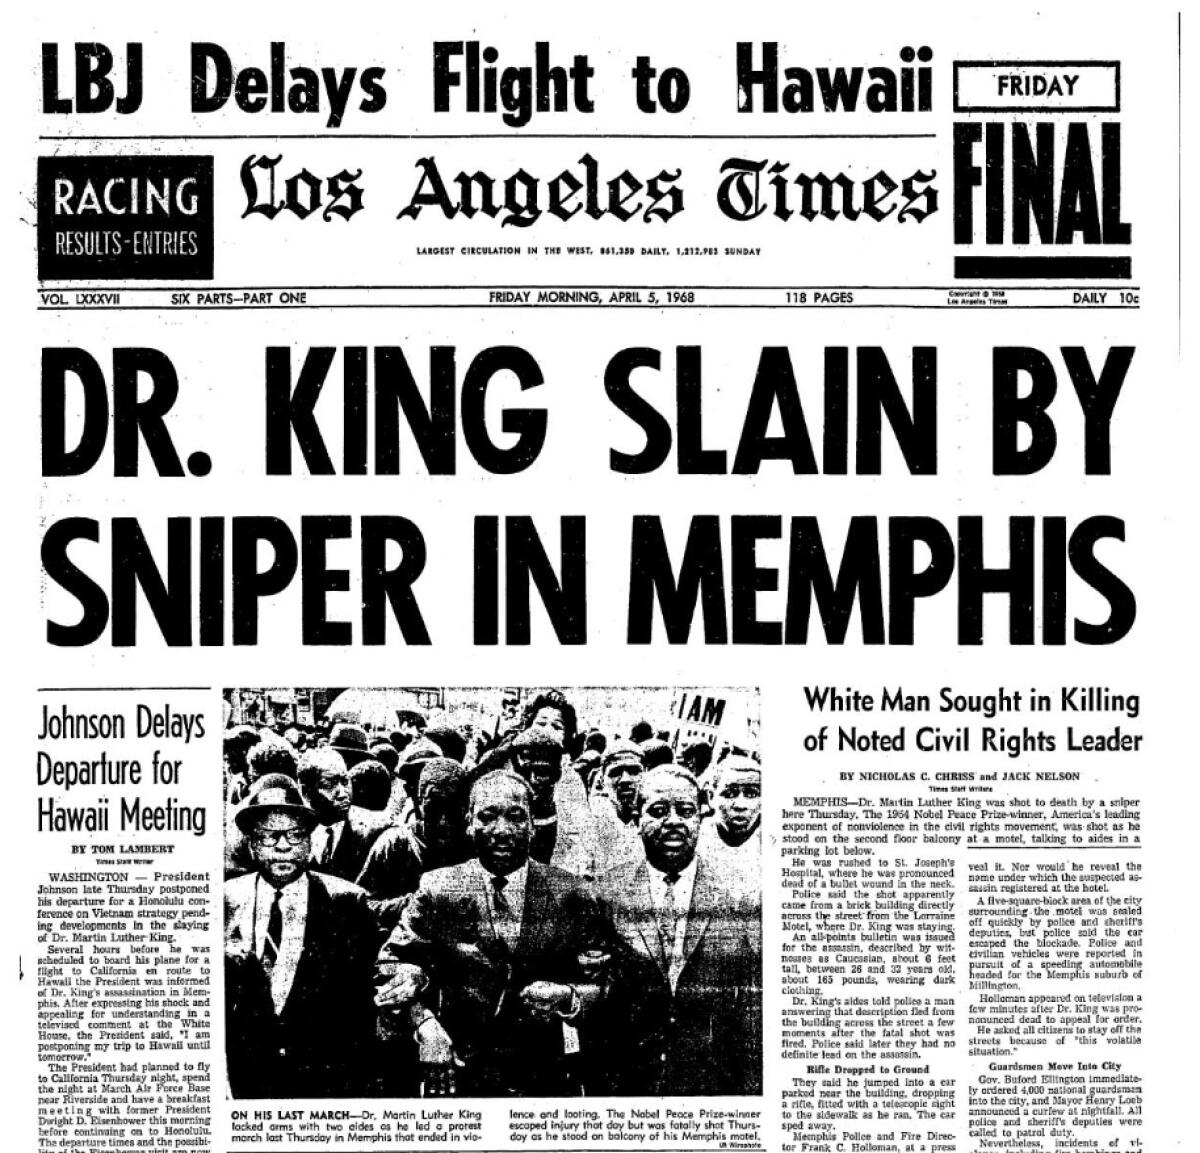 The front page of the Los Angeles Times the day after Dr. Martin Luther King Jr. was shot and killed in Memphis.